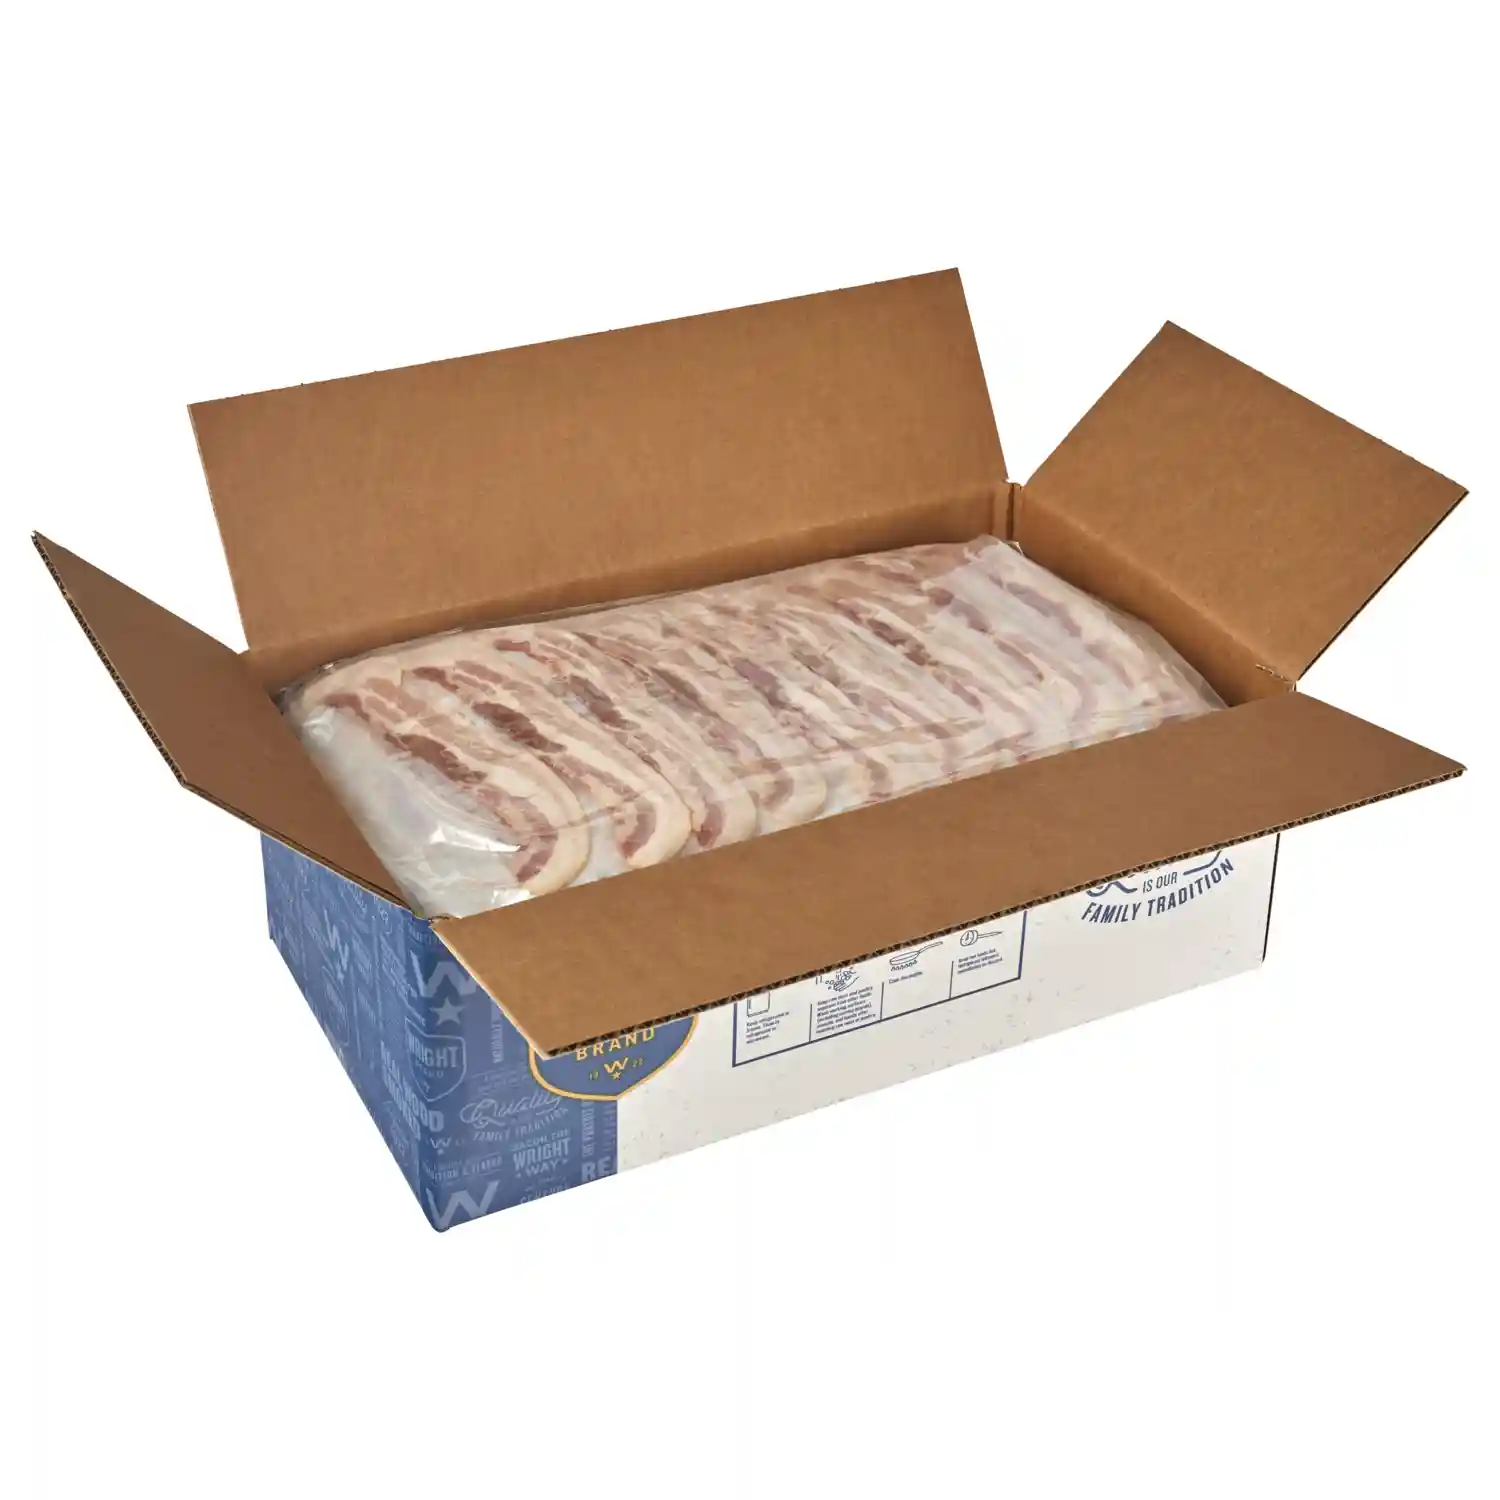 Wright® Brand Naturally Hickory Smoked Thin Sliced Bacon, Flat Pack, 15Lbs, 18-22 Slices per Pound, Gas Flushed_image_41